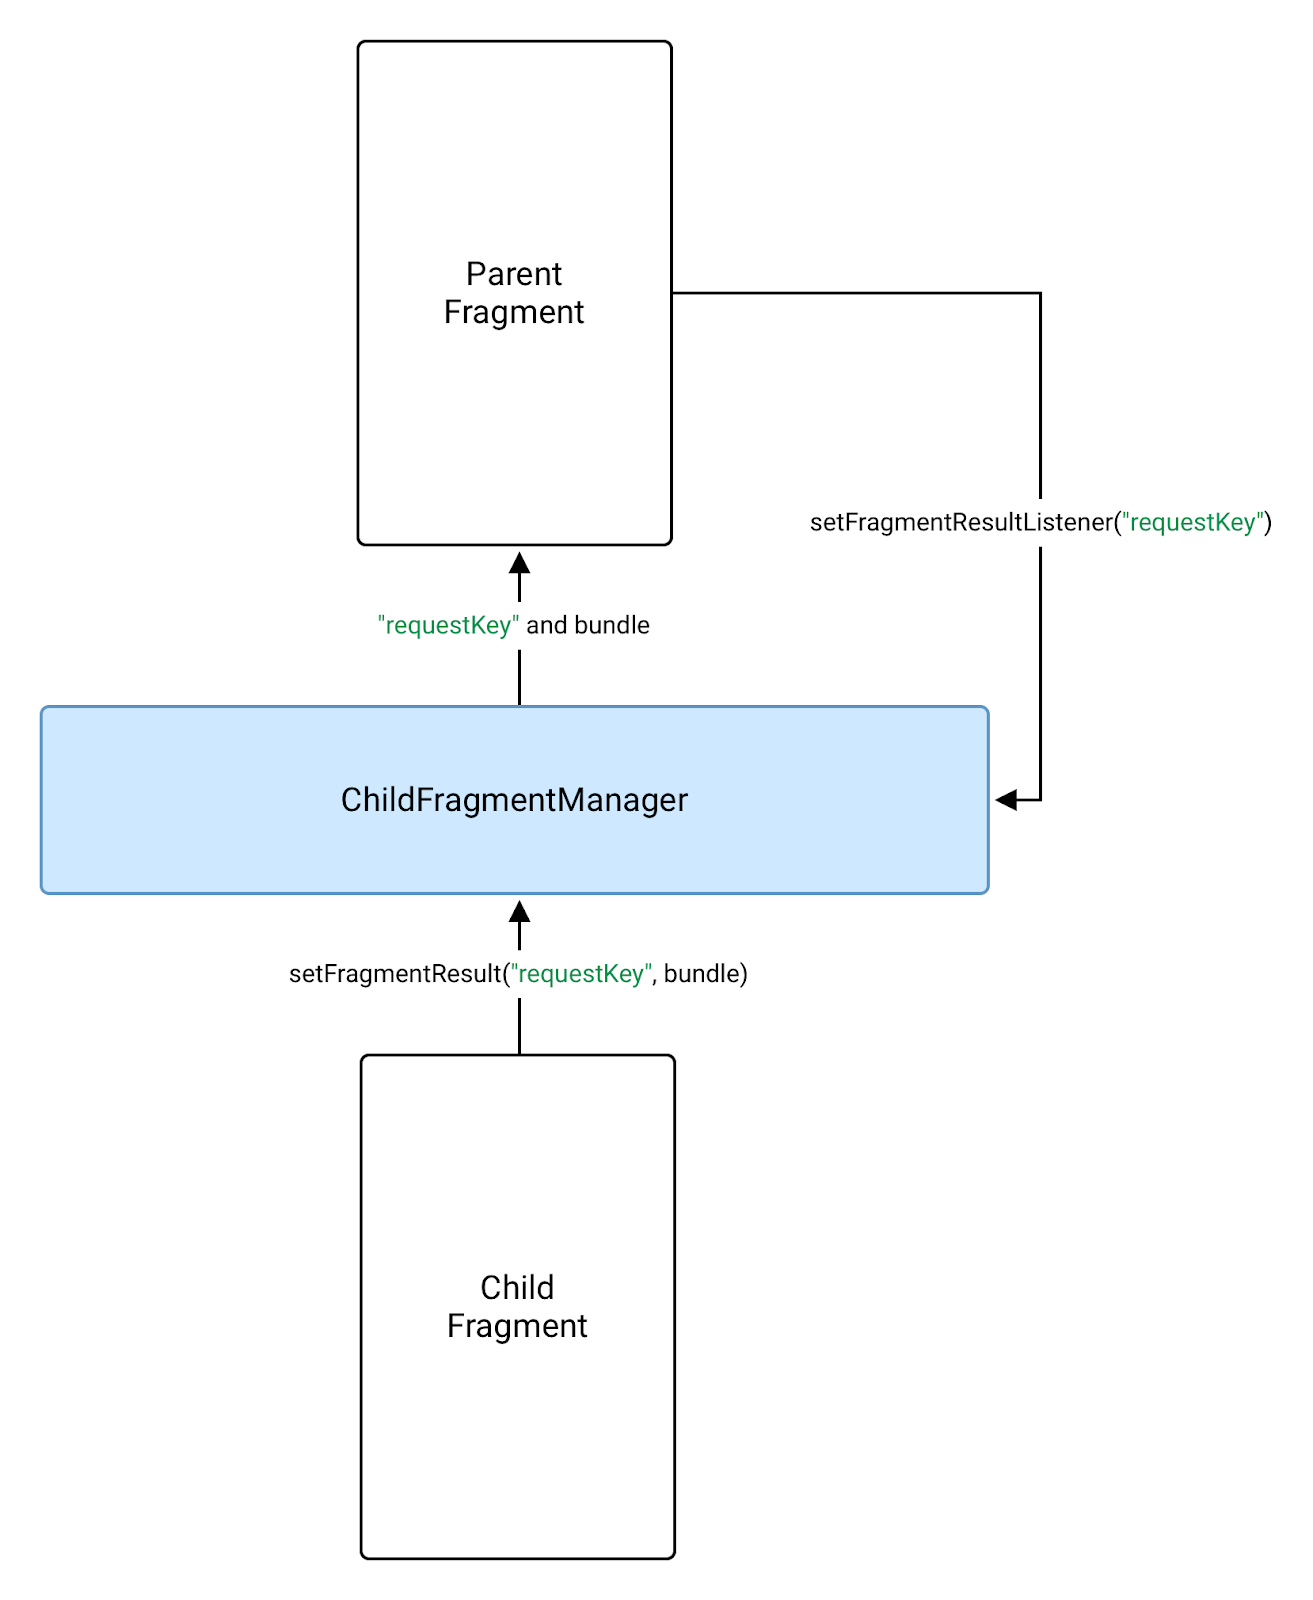 a child fragment can use FragmentManager to send a result
            to its parent